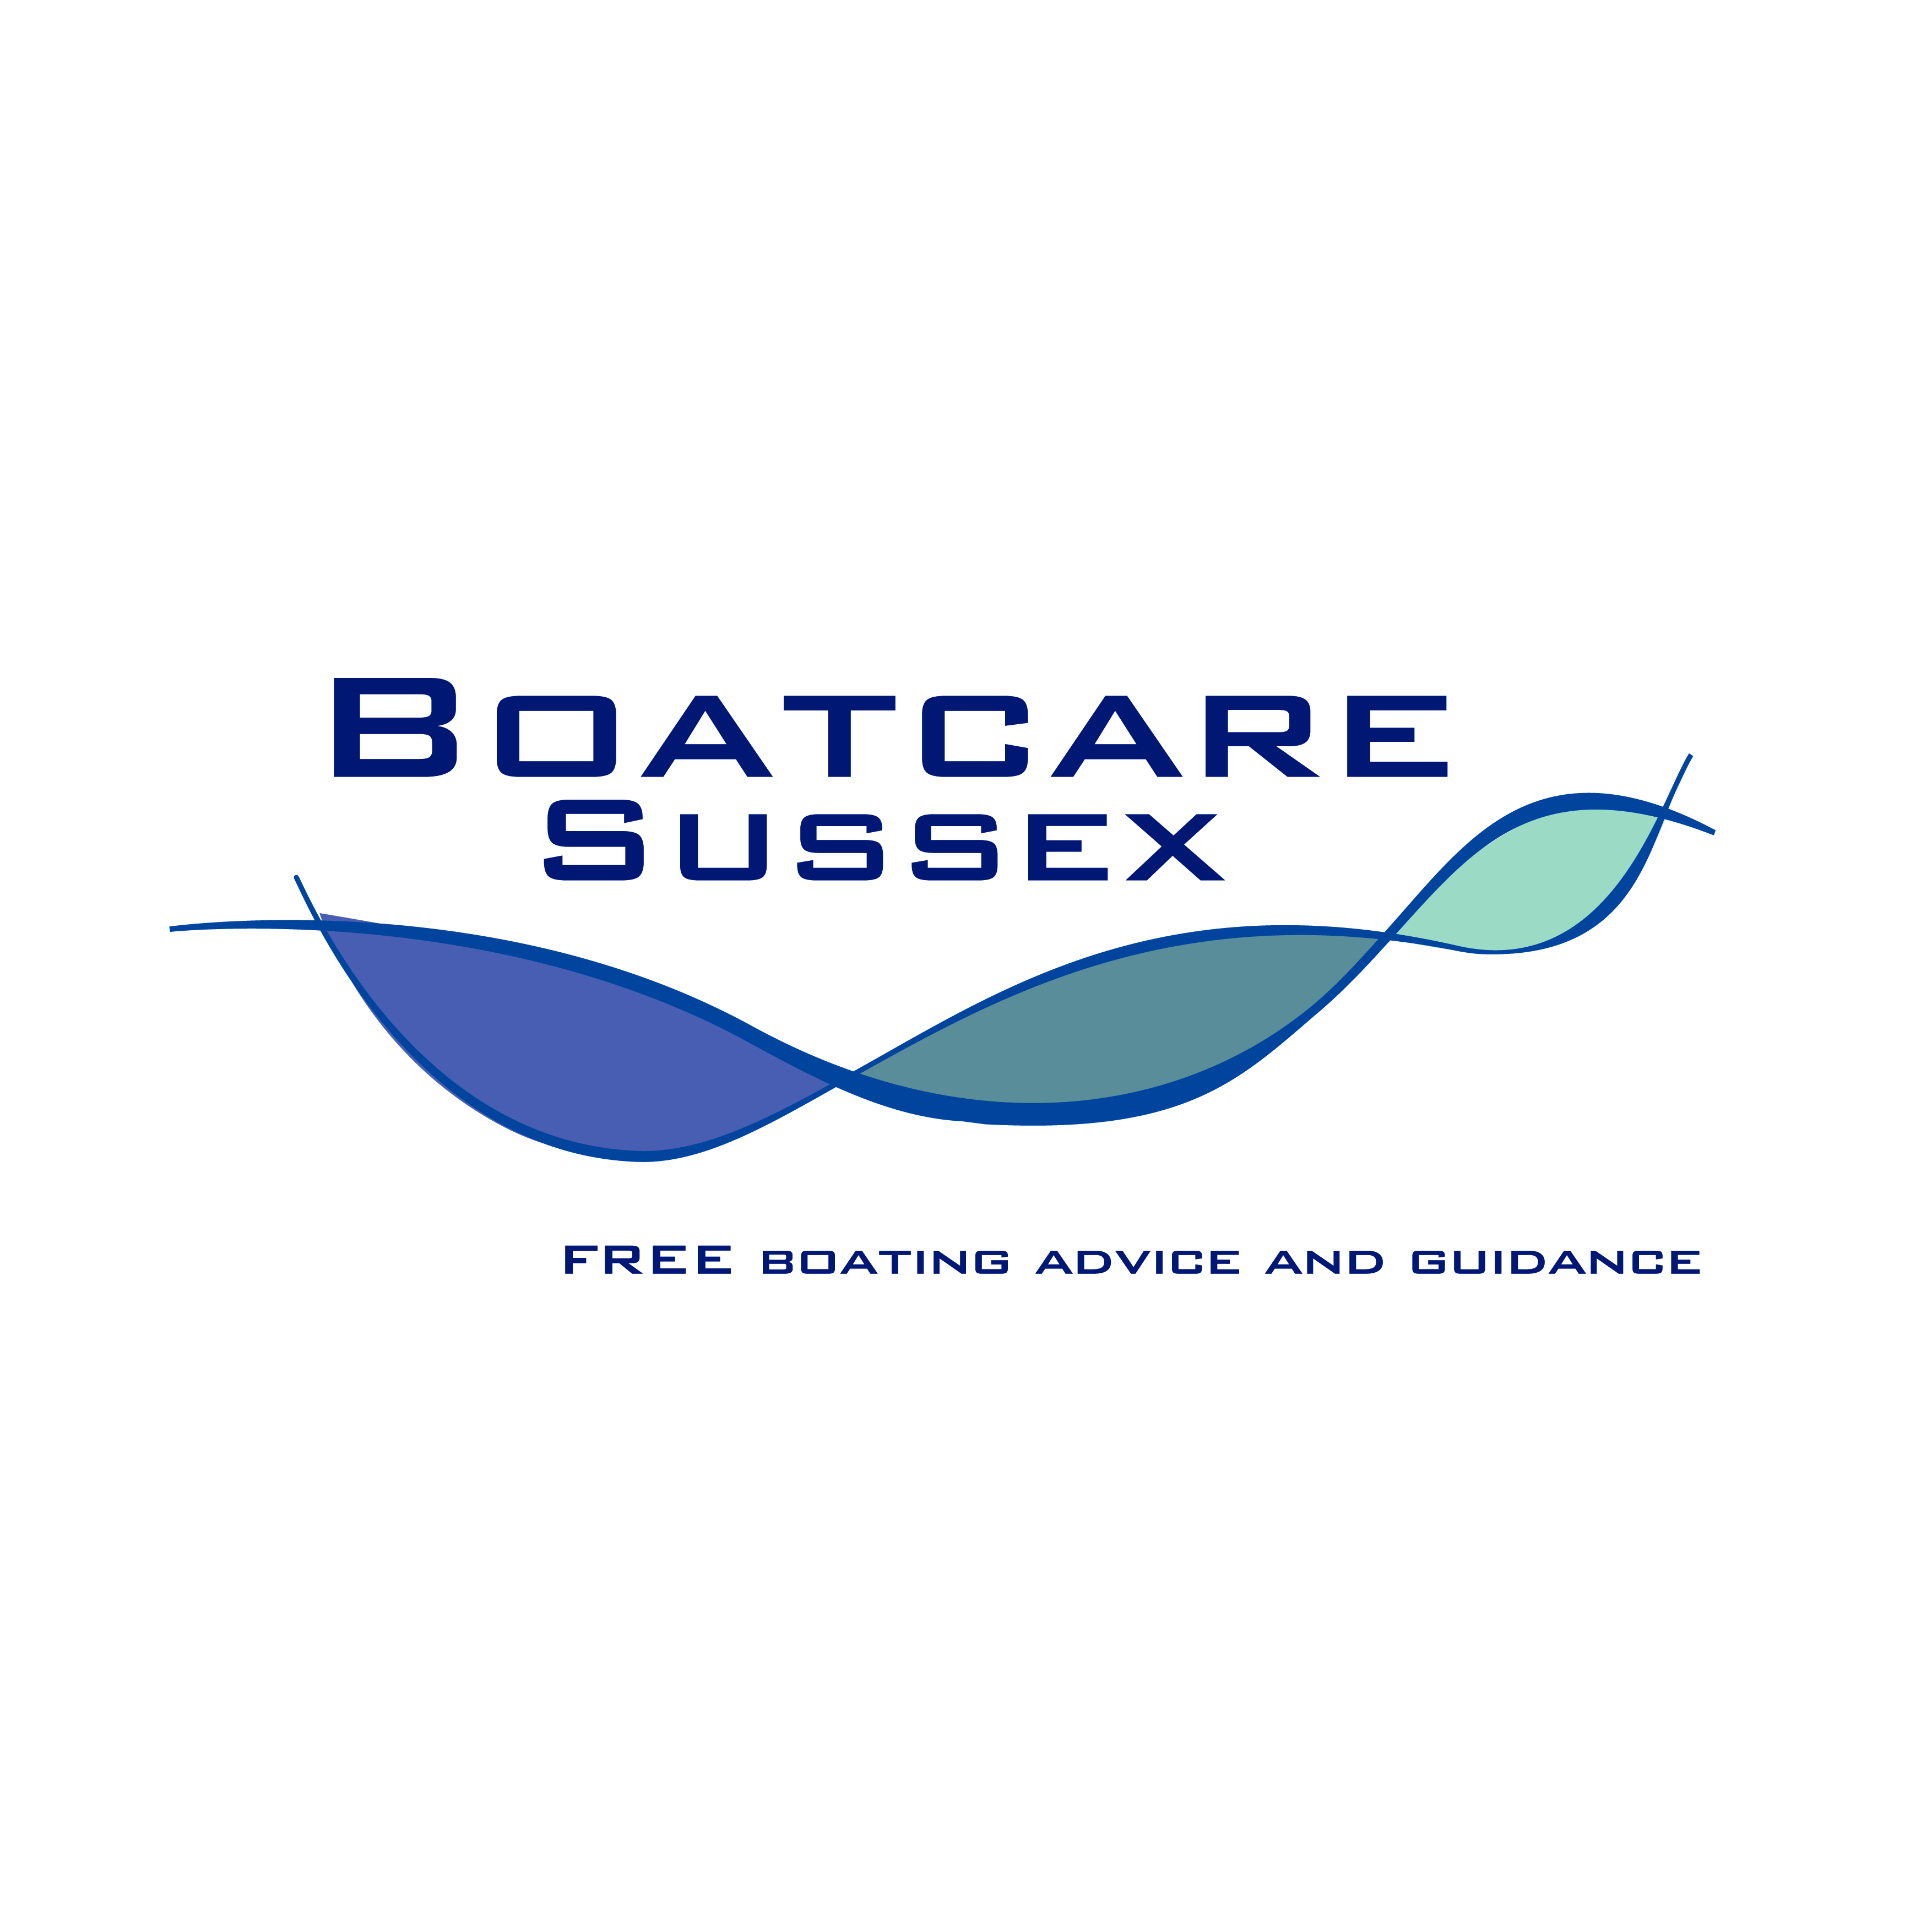 Boatcare Sussex